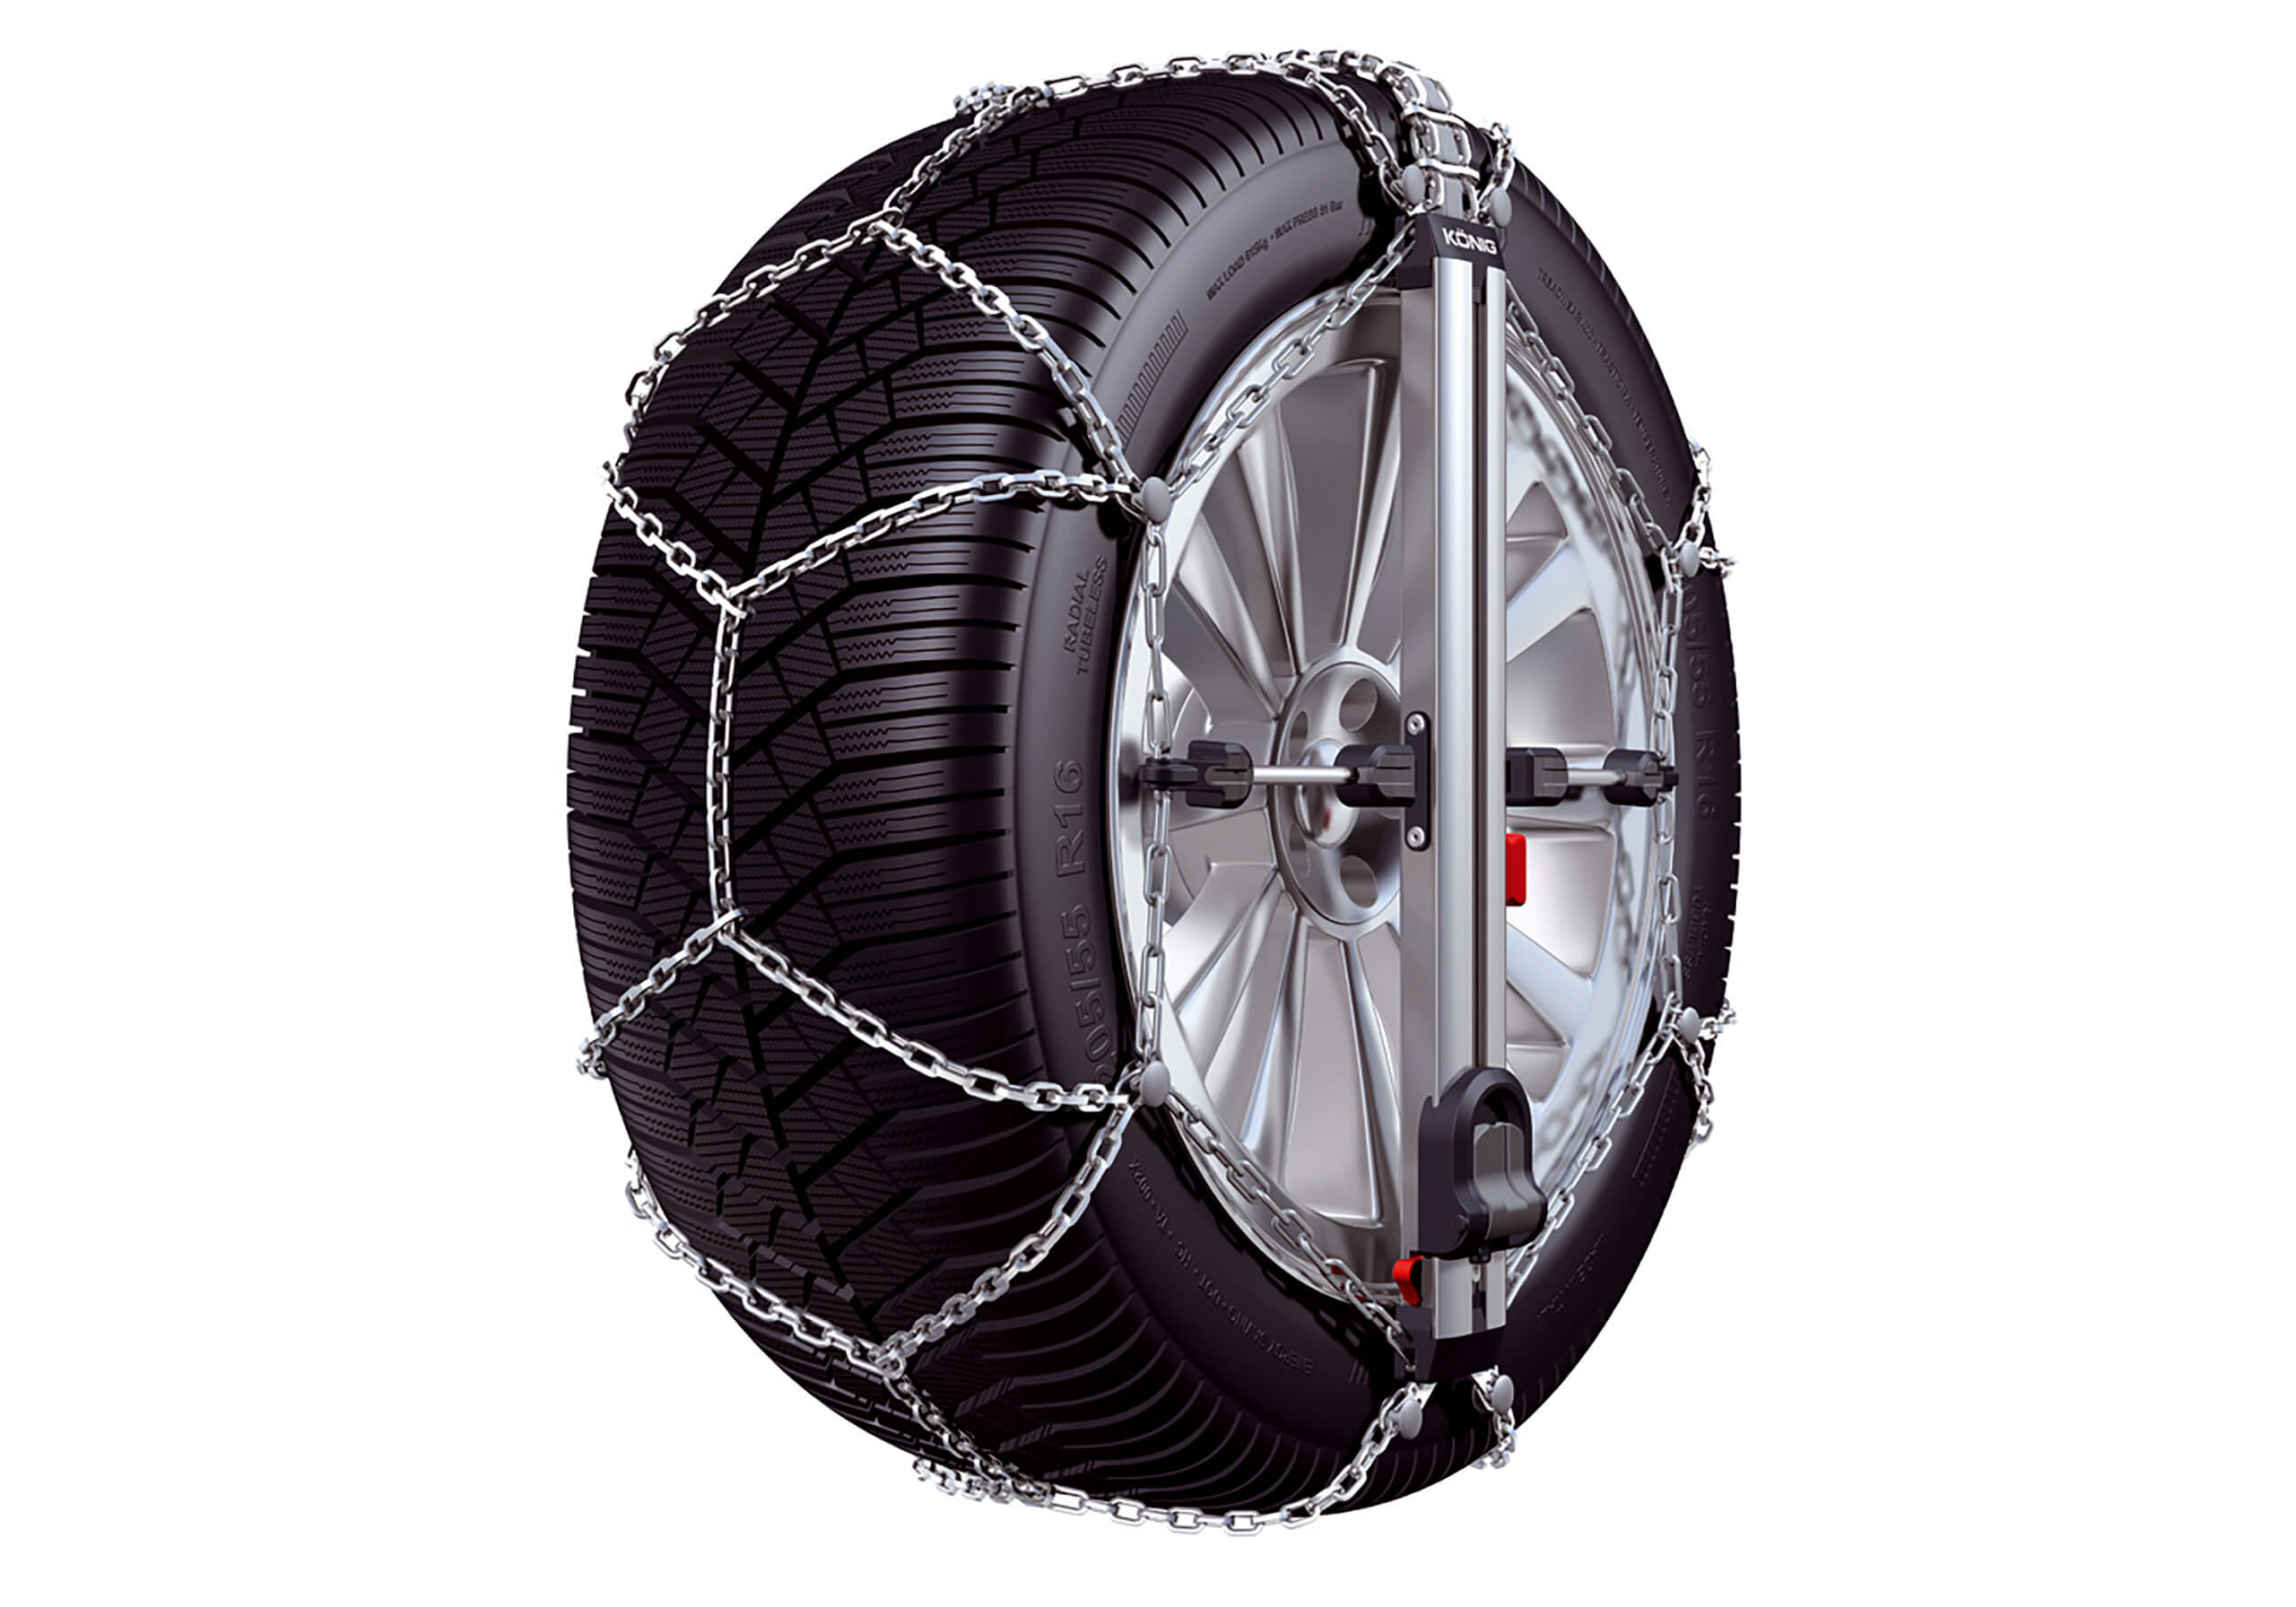 BMW 3 series Touring (1999 to 2002):Knig CU-9 Easy-fit snow chains (pair) no. KGCU-9 090